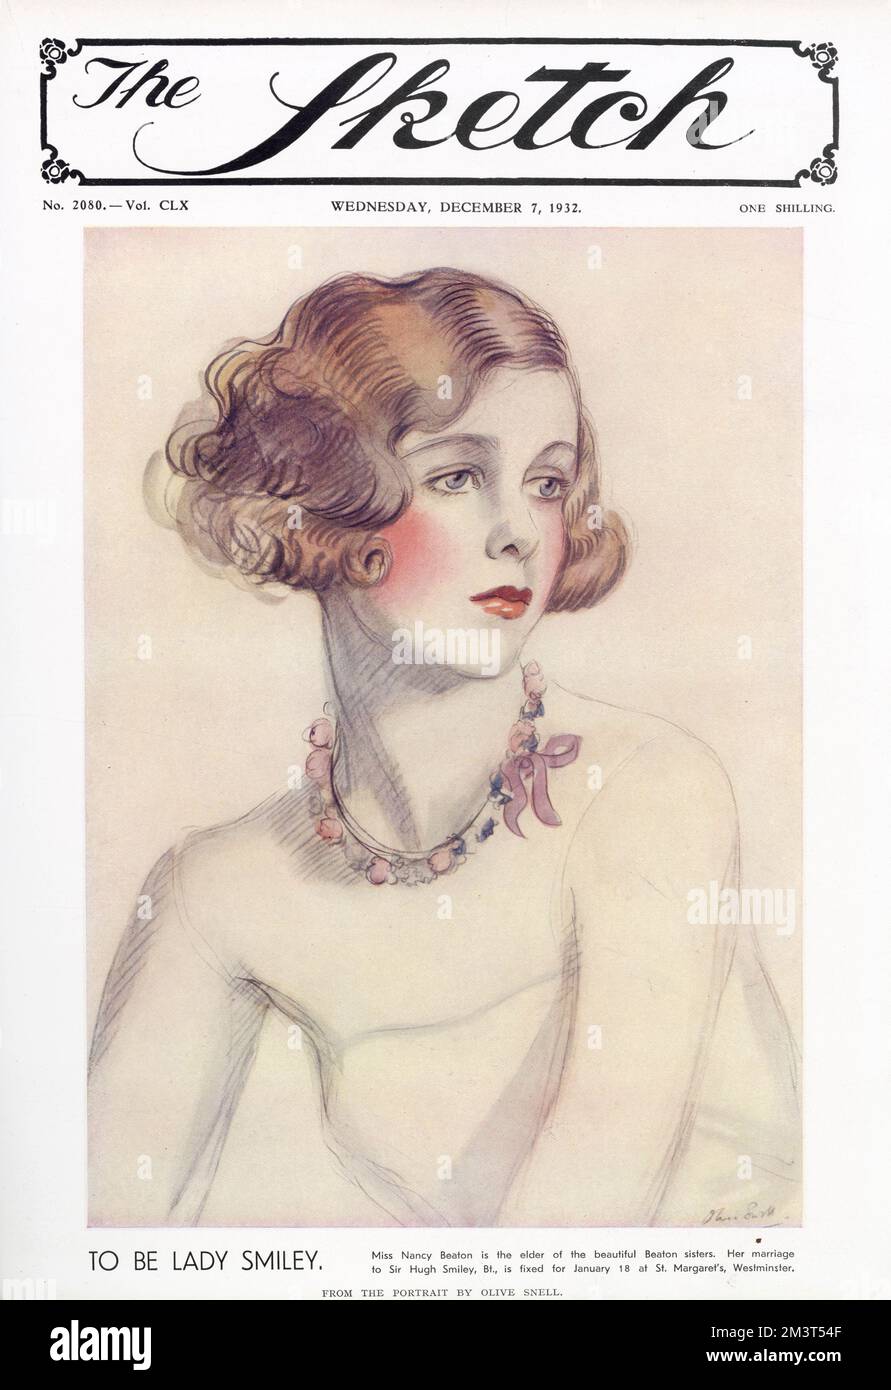 Front cover of The Sketch featuring a portrait of Nancy Beaton (1909-1989), sister of Cecil Beaton and Baba Beaton, at the time of her engagement to Sir Hugh Smiley, which was fixed for 18 January 1933. Stock Photo